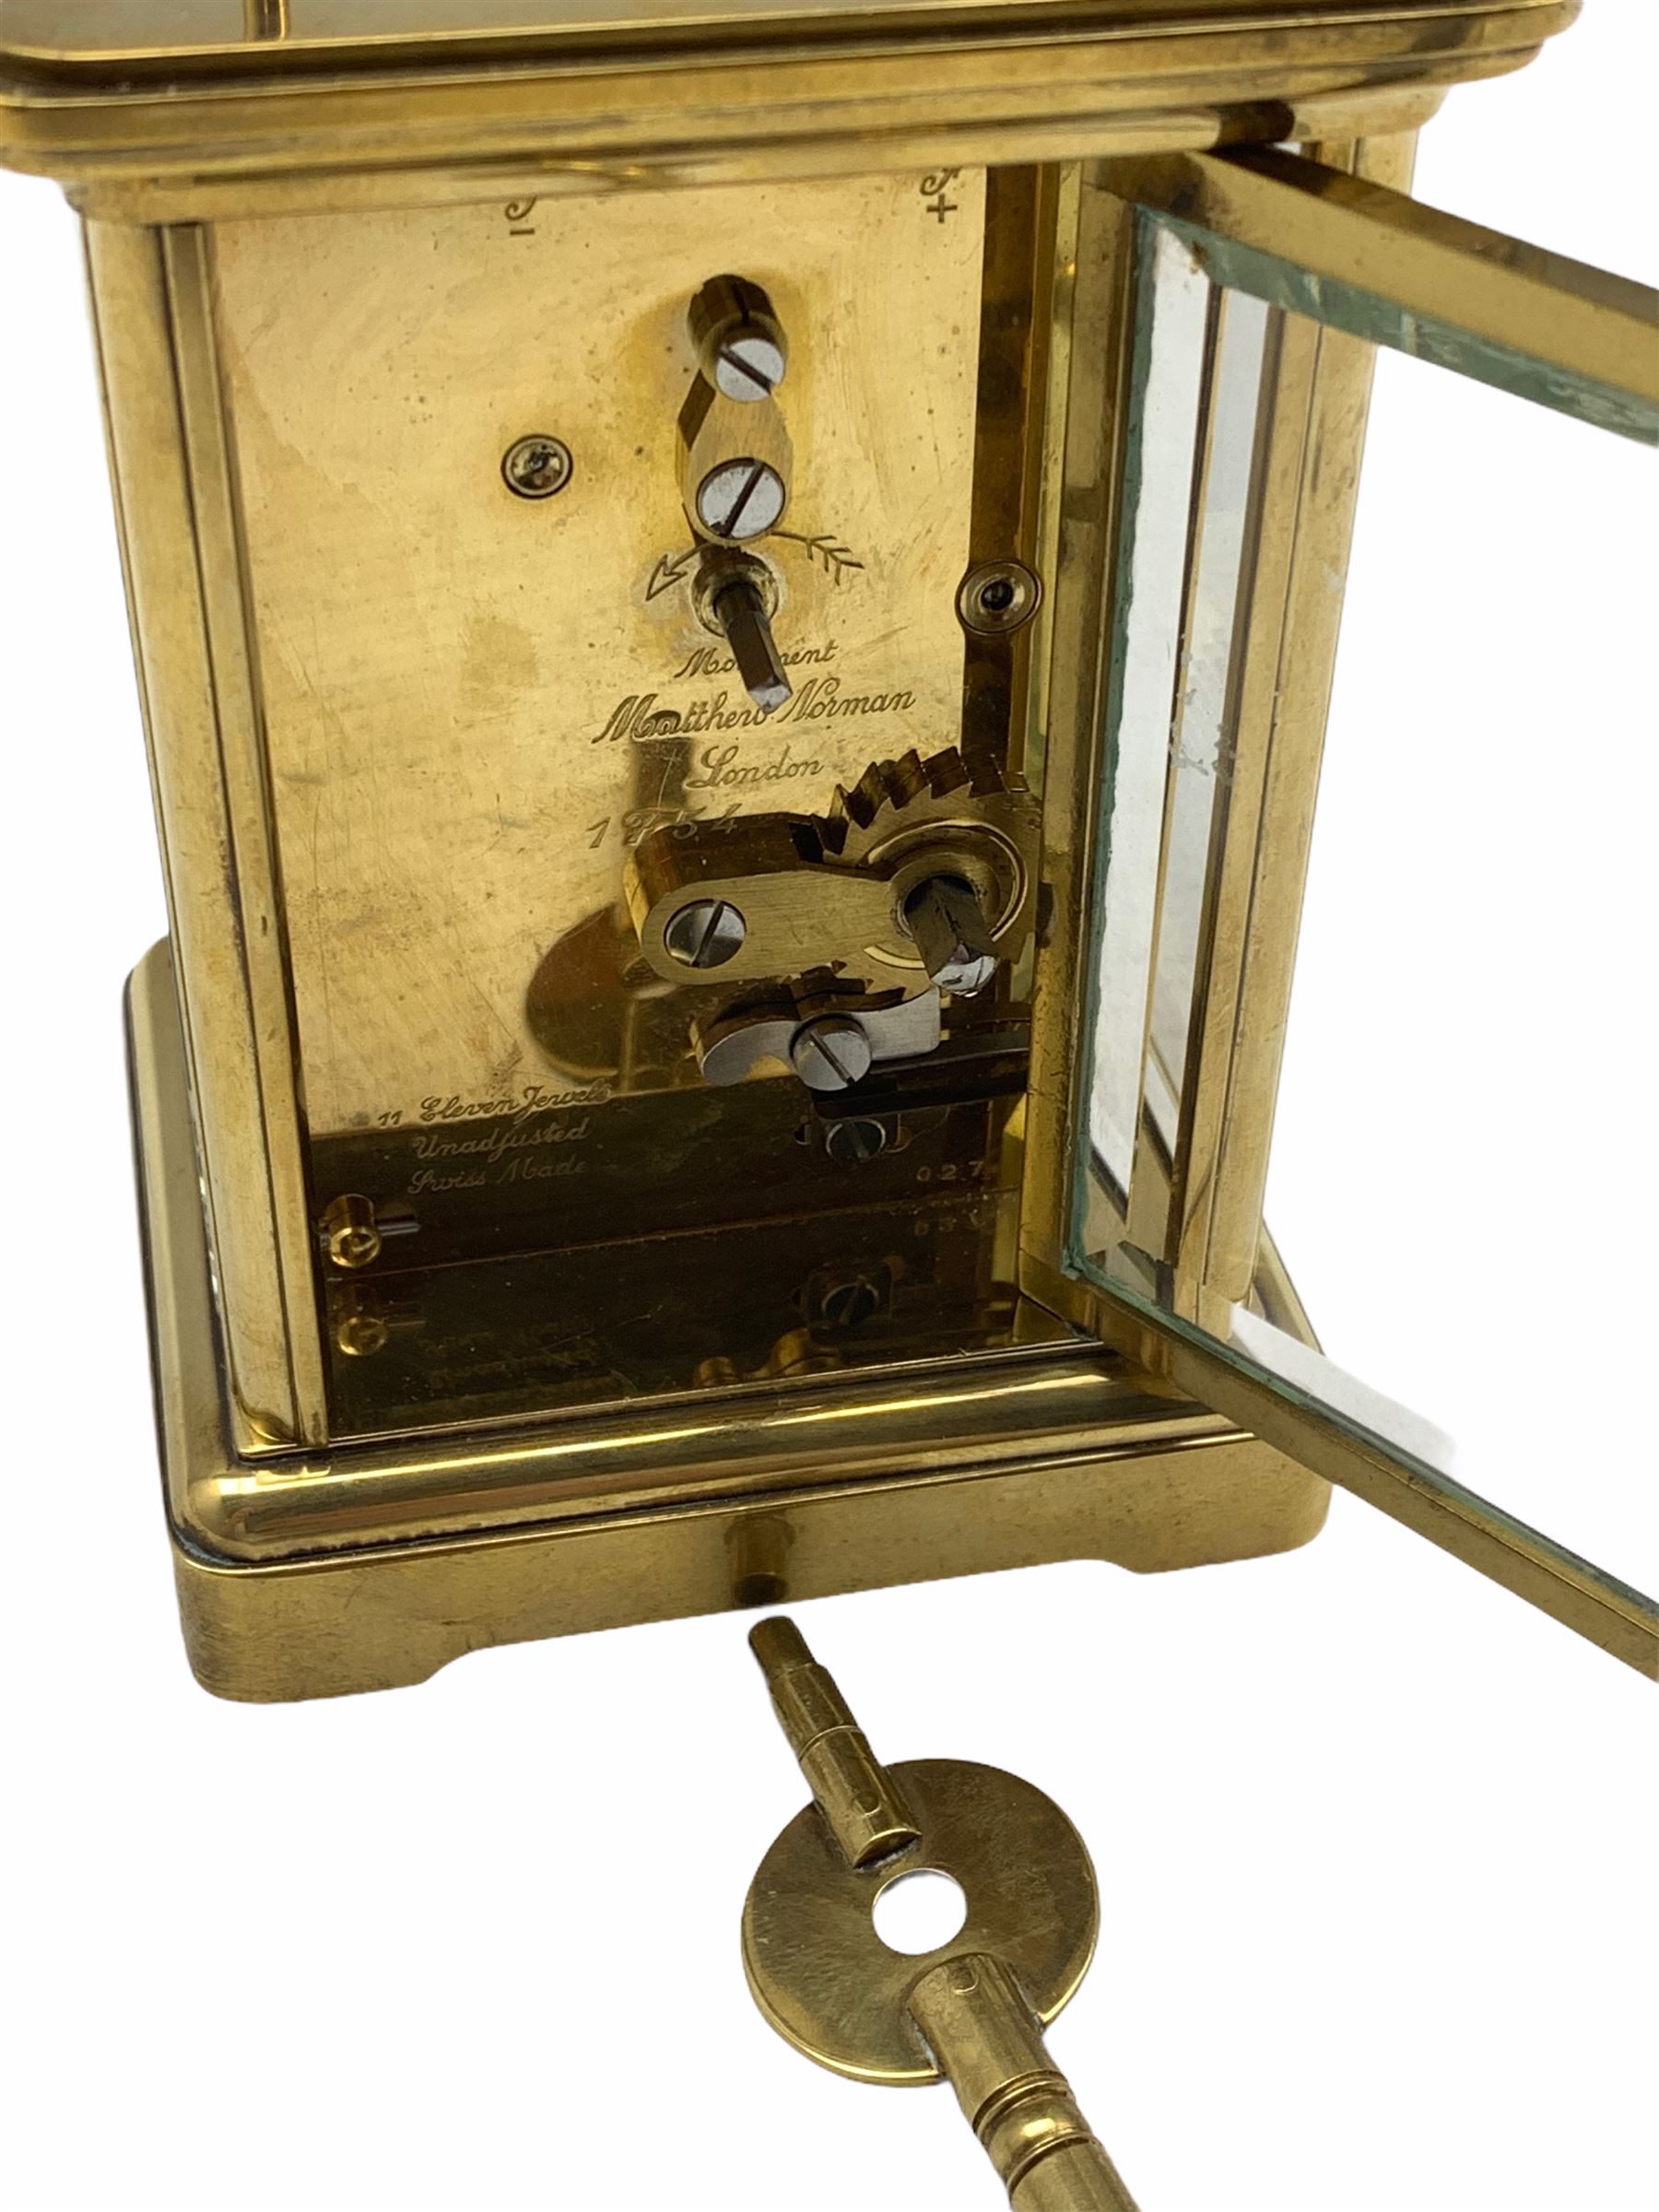 20th Century Mathew Norman eight-day Corniche cased timepiece carriage clock with a lever platform e - Image 3 of 4